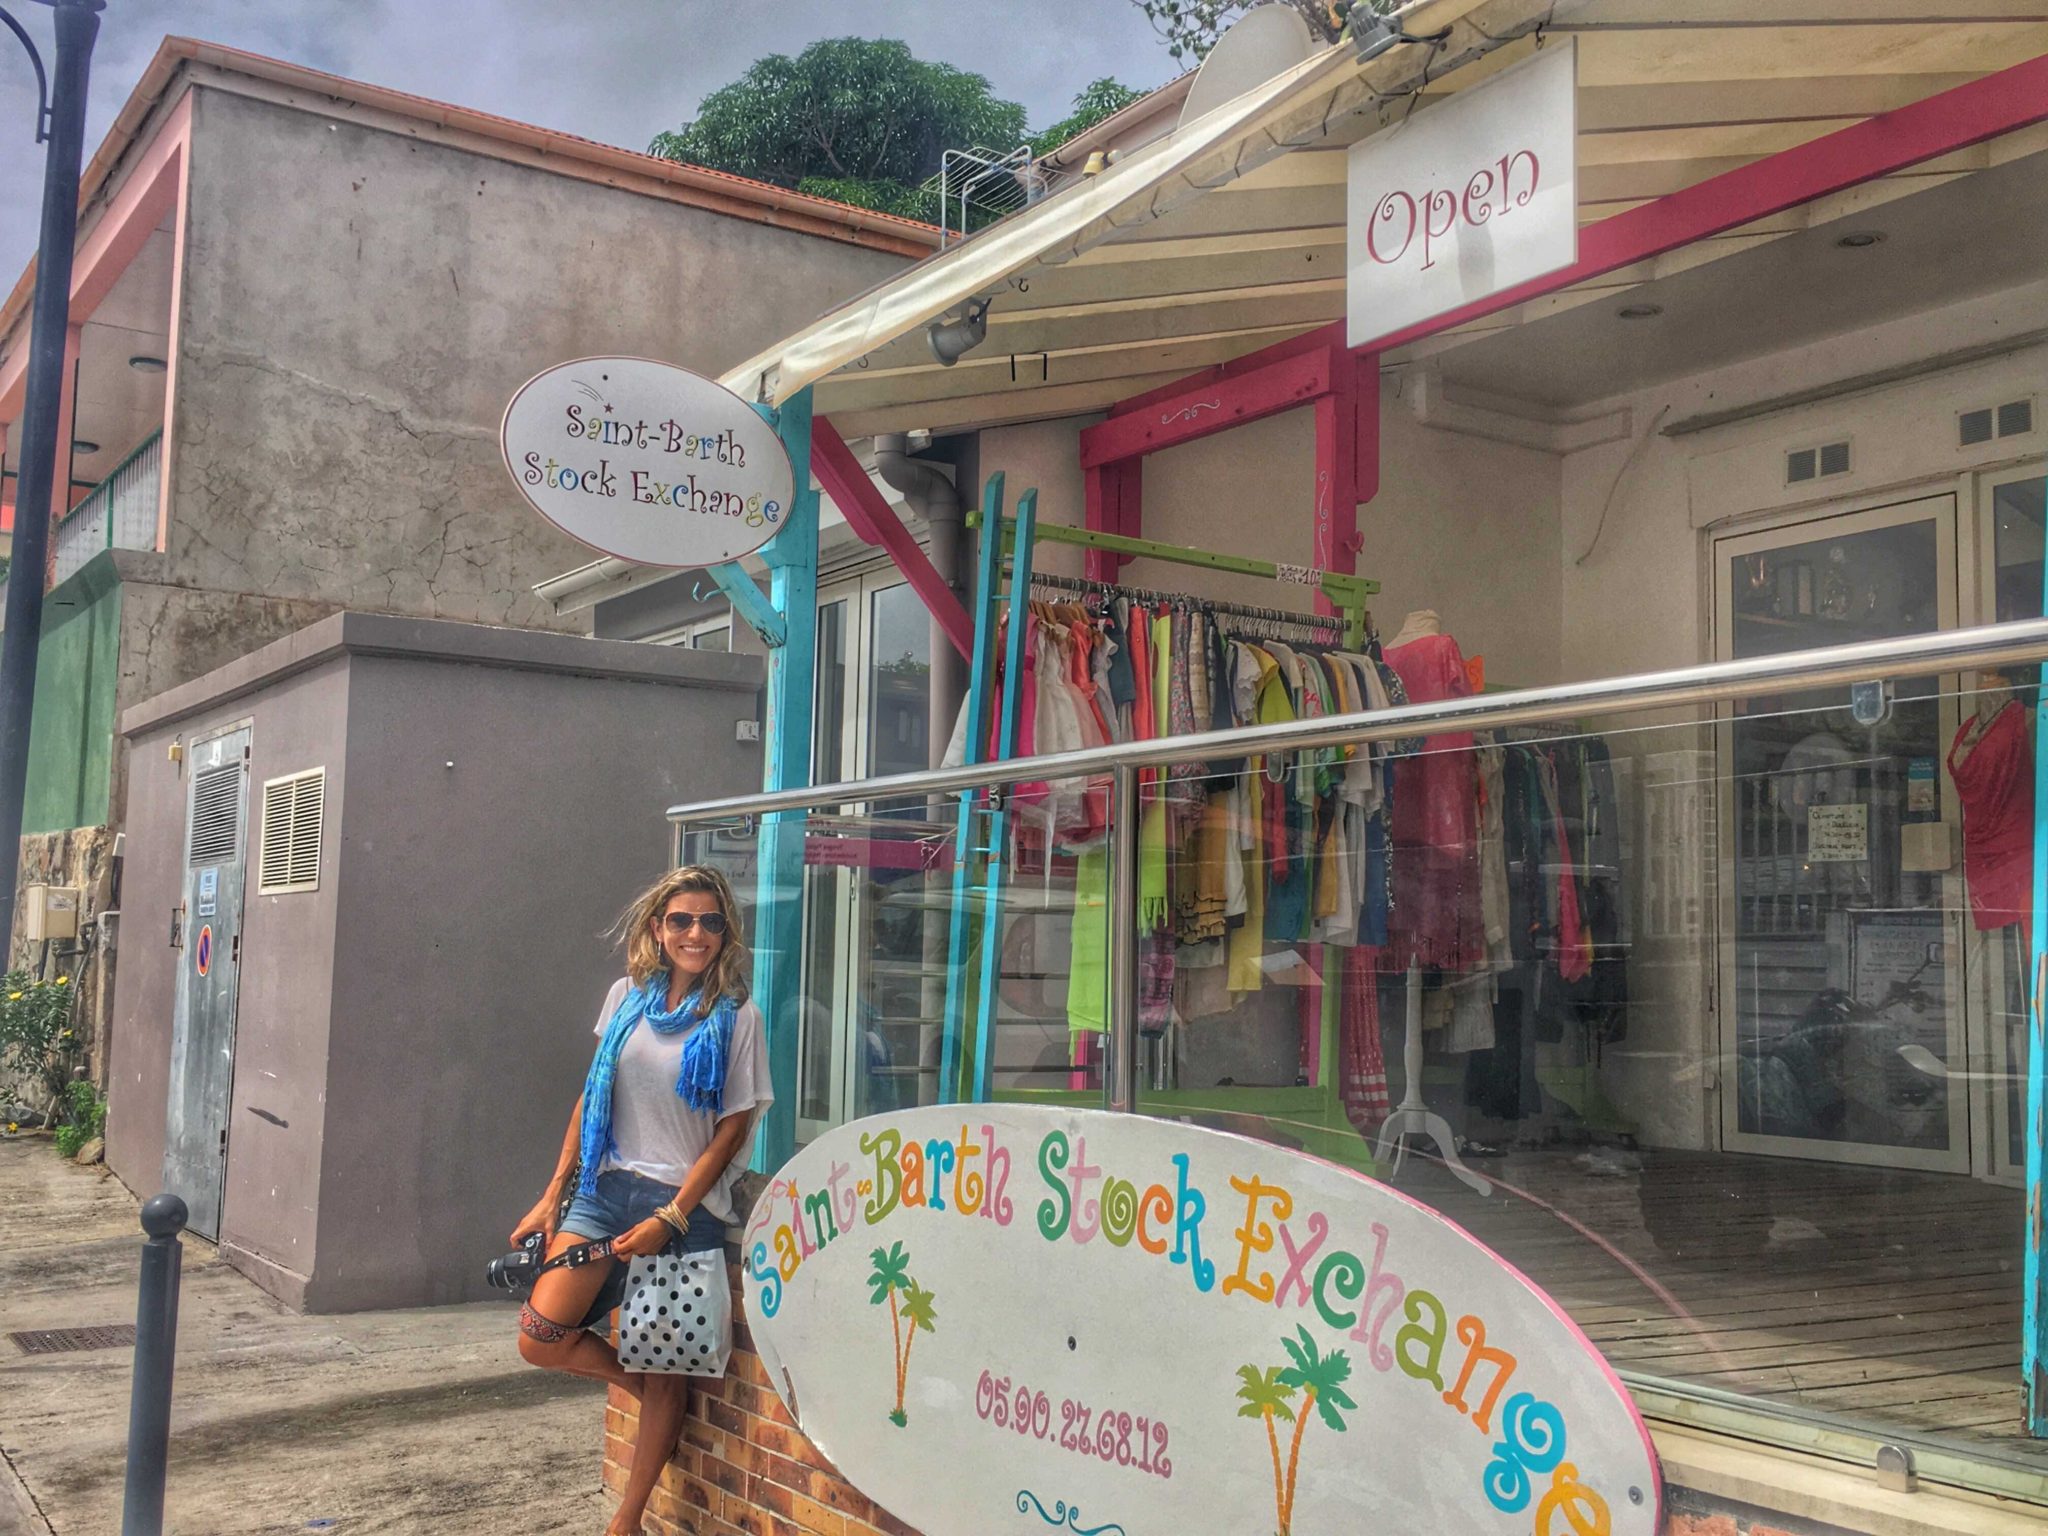 Gustavia :: Best Time to Shop During Low Season 